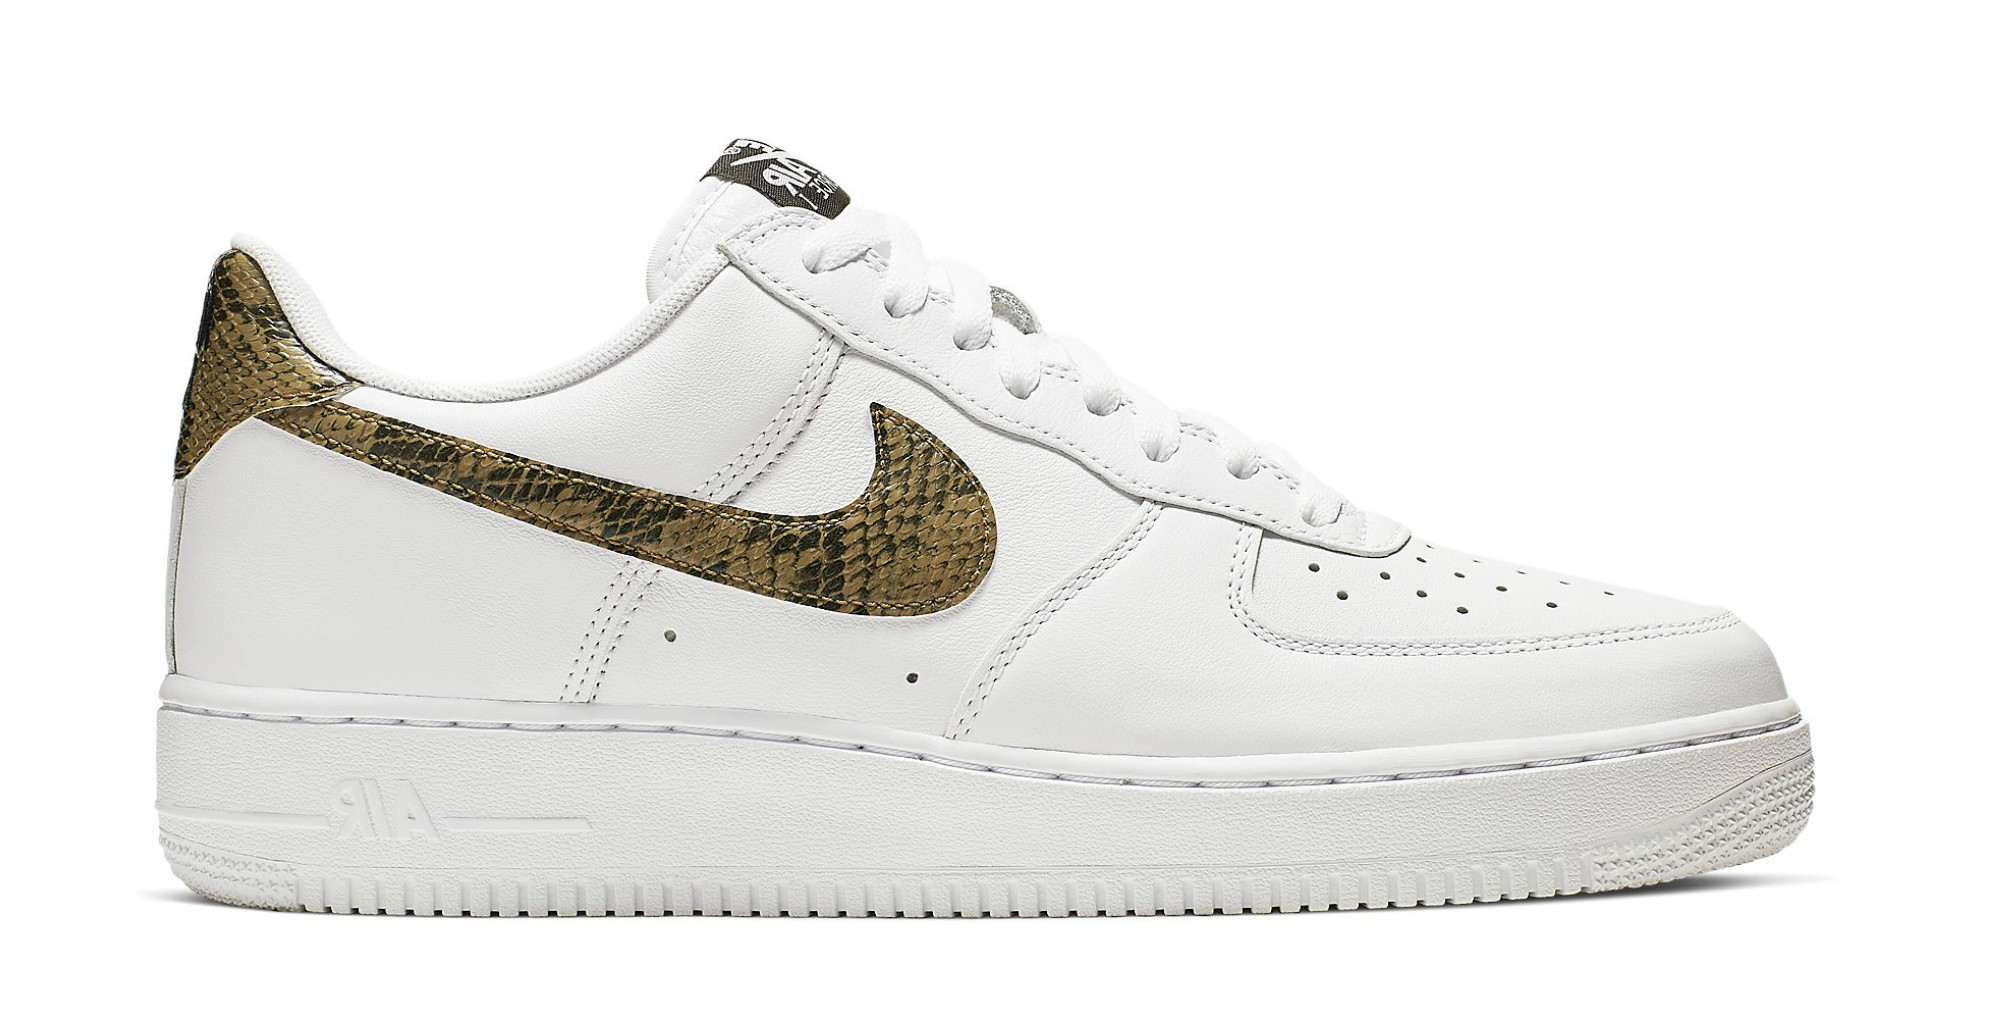 nike air force 1 low 2019 ivory snake ao1635 100 release date